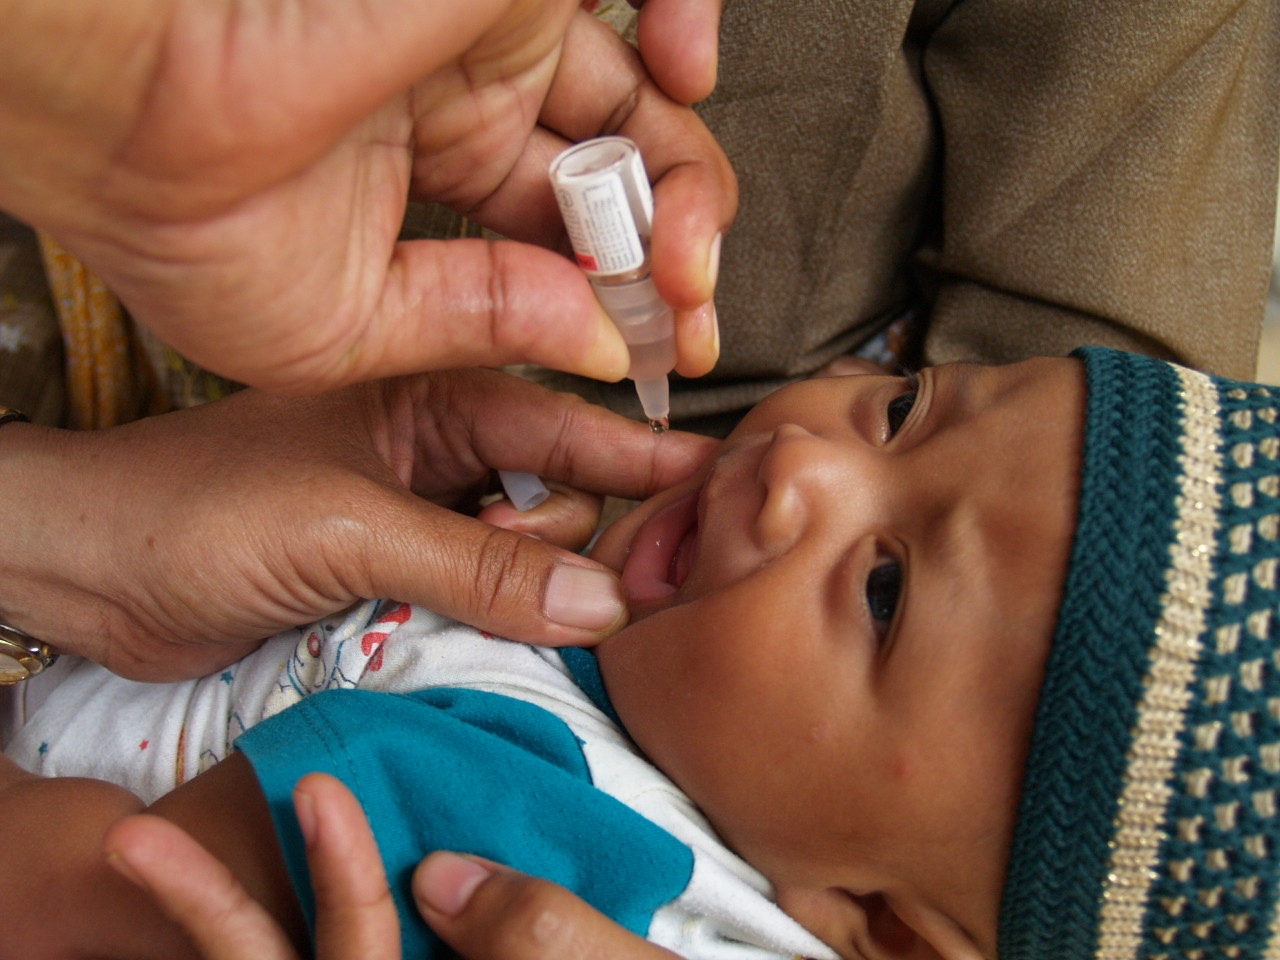 Indonesia’s MCC threshold program was designed to help build a sustainable childhood immunization system by measuring vaccination coverage and ensuring the availability of quality vaccine supplies.